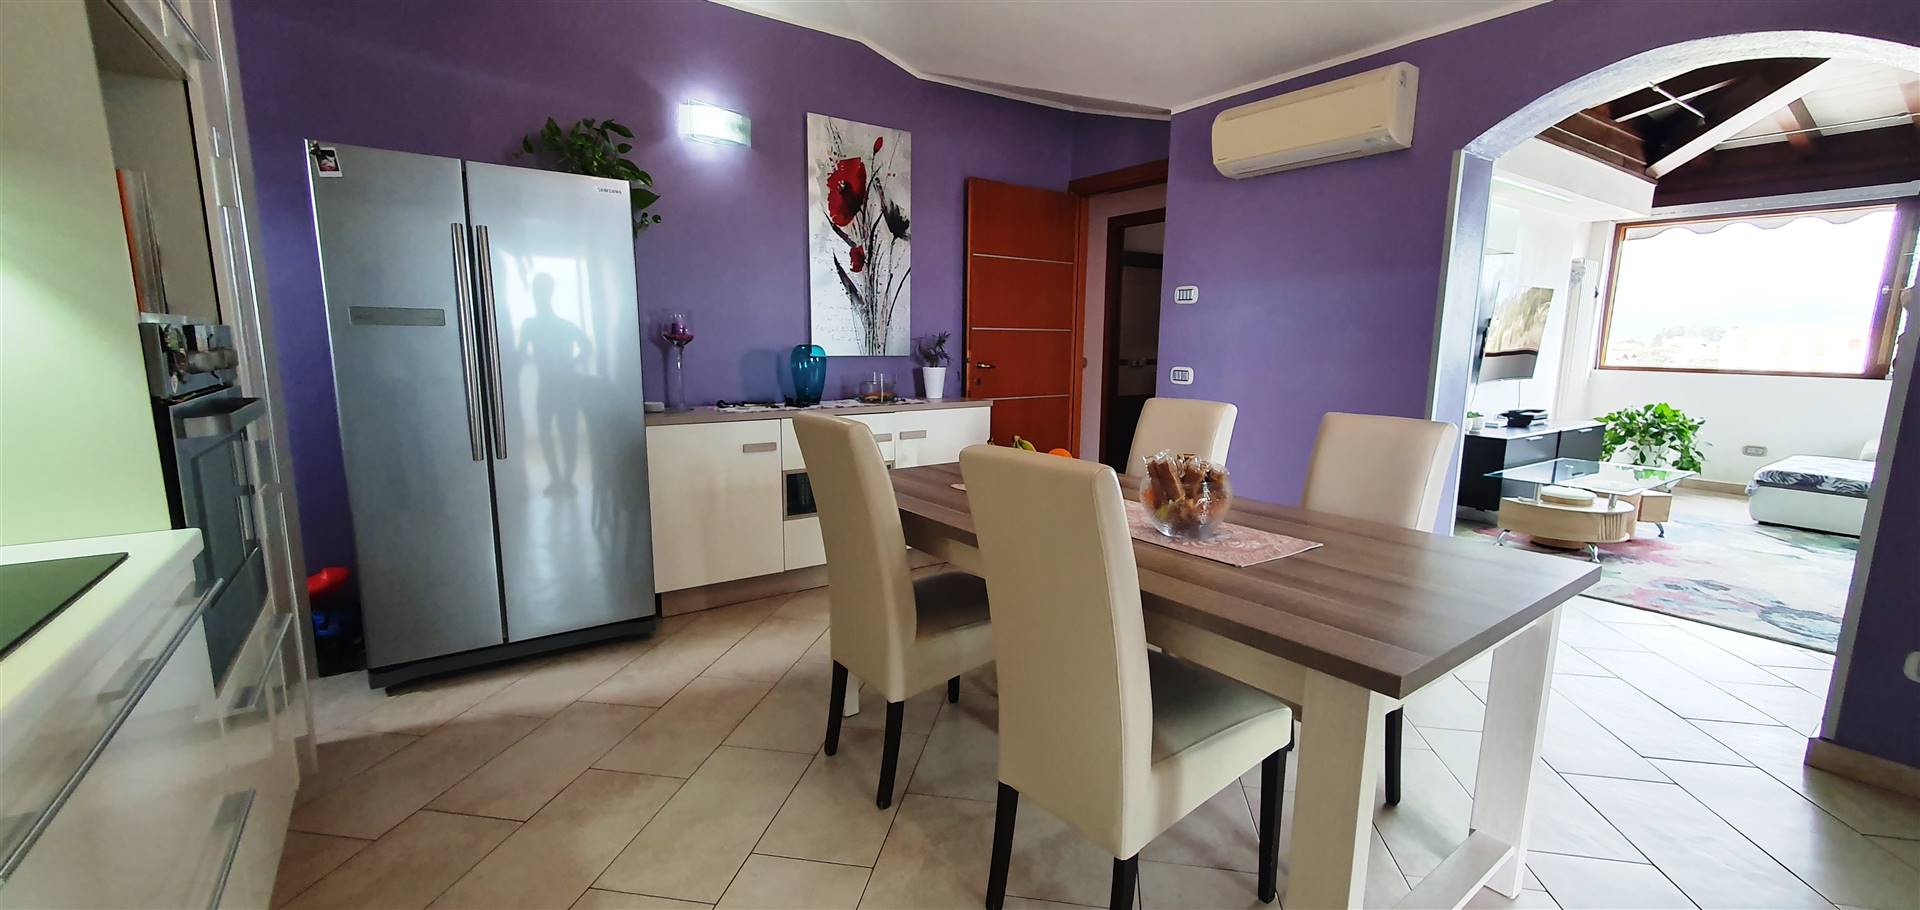 TORTOLI', Penthouse for sale of 135 Sq. mt., Excellent Condition, Heating Individual heating system, Energetic class: C, placed at 2°, composed by: 5 